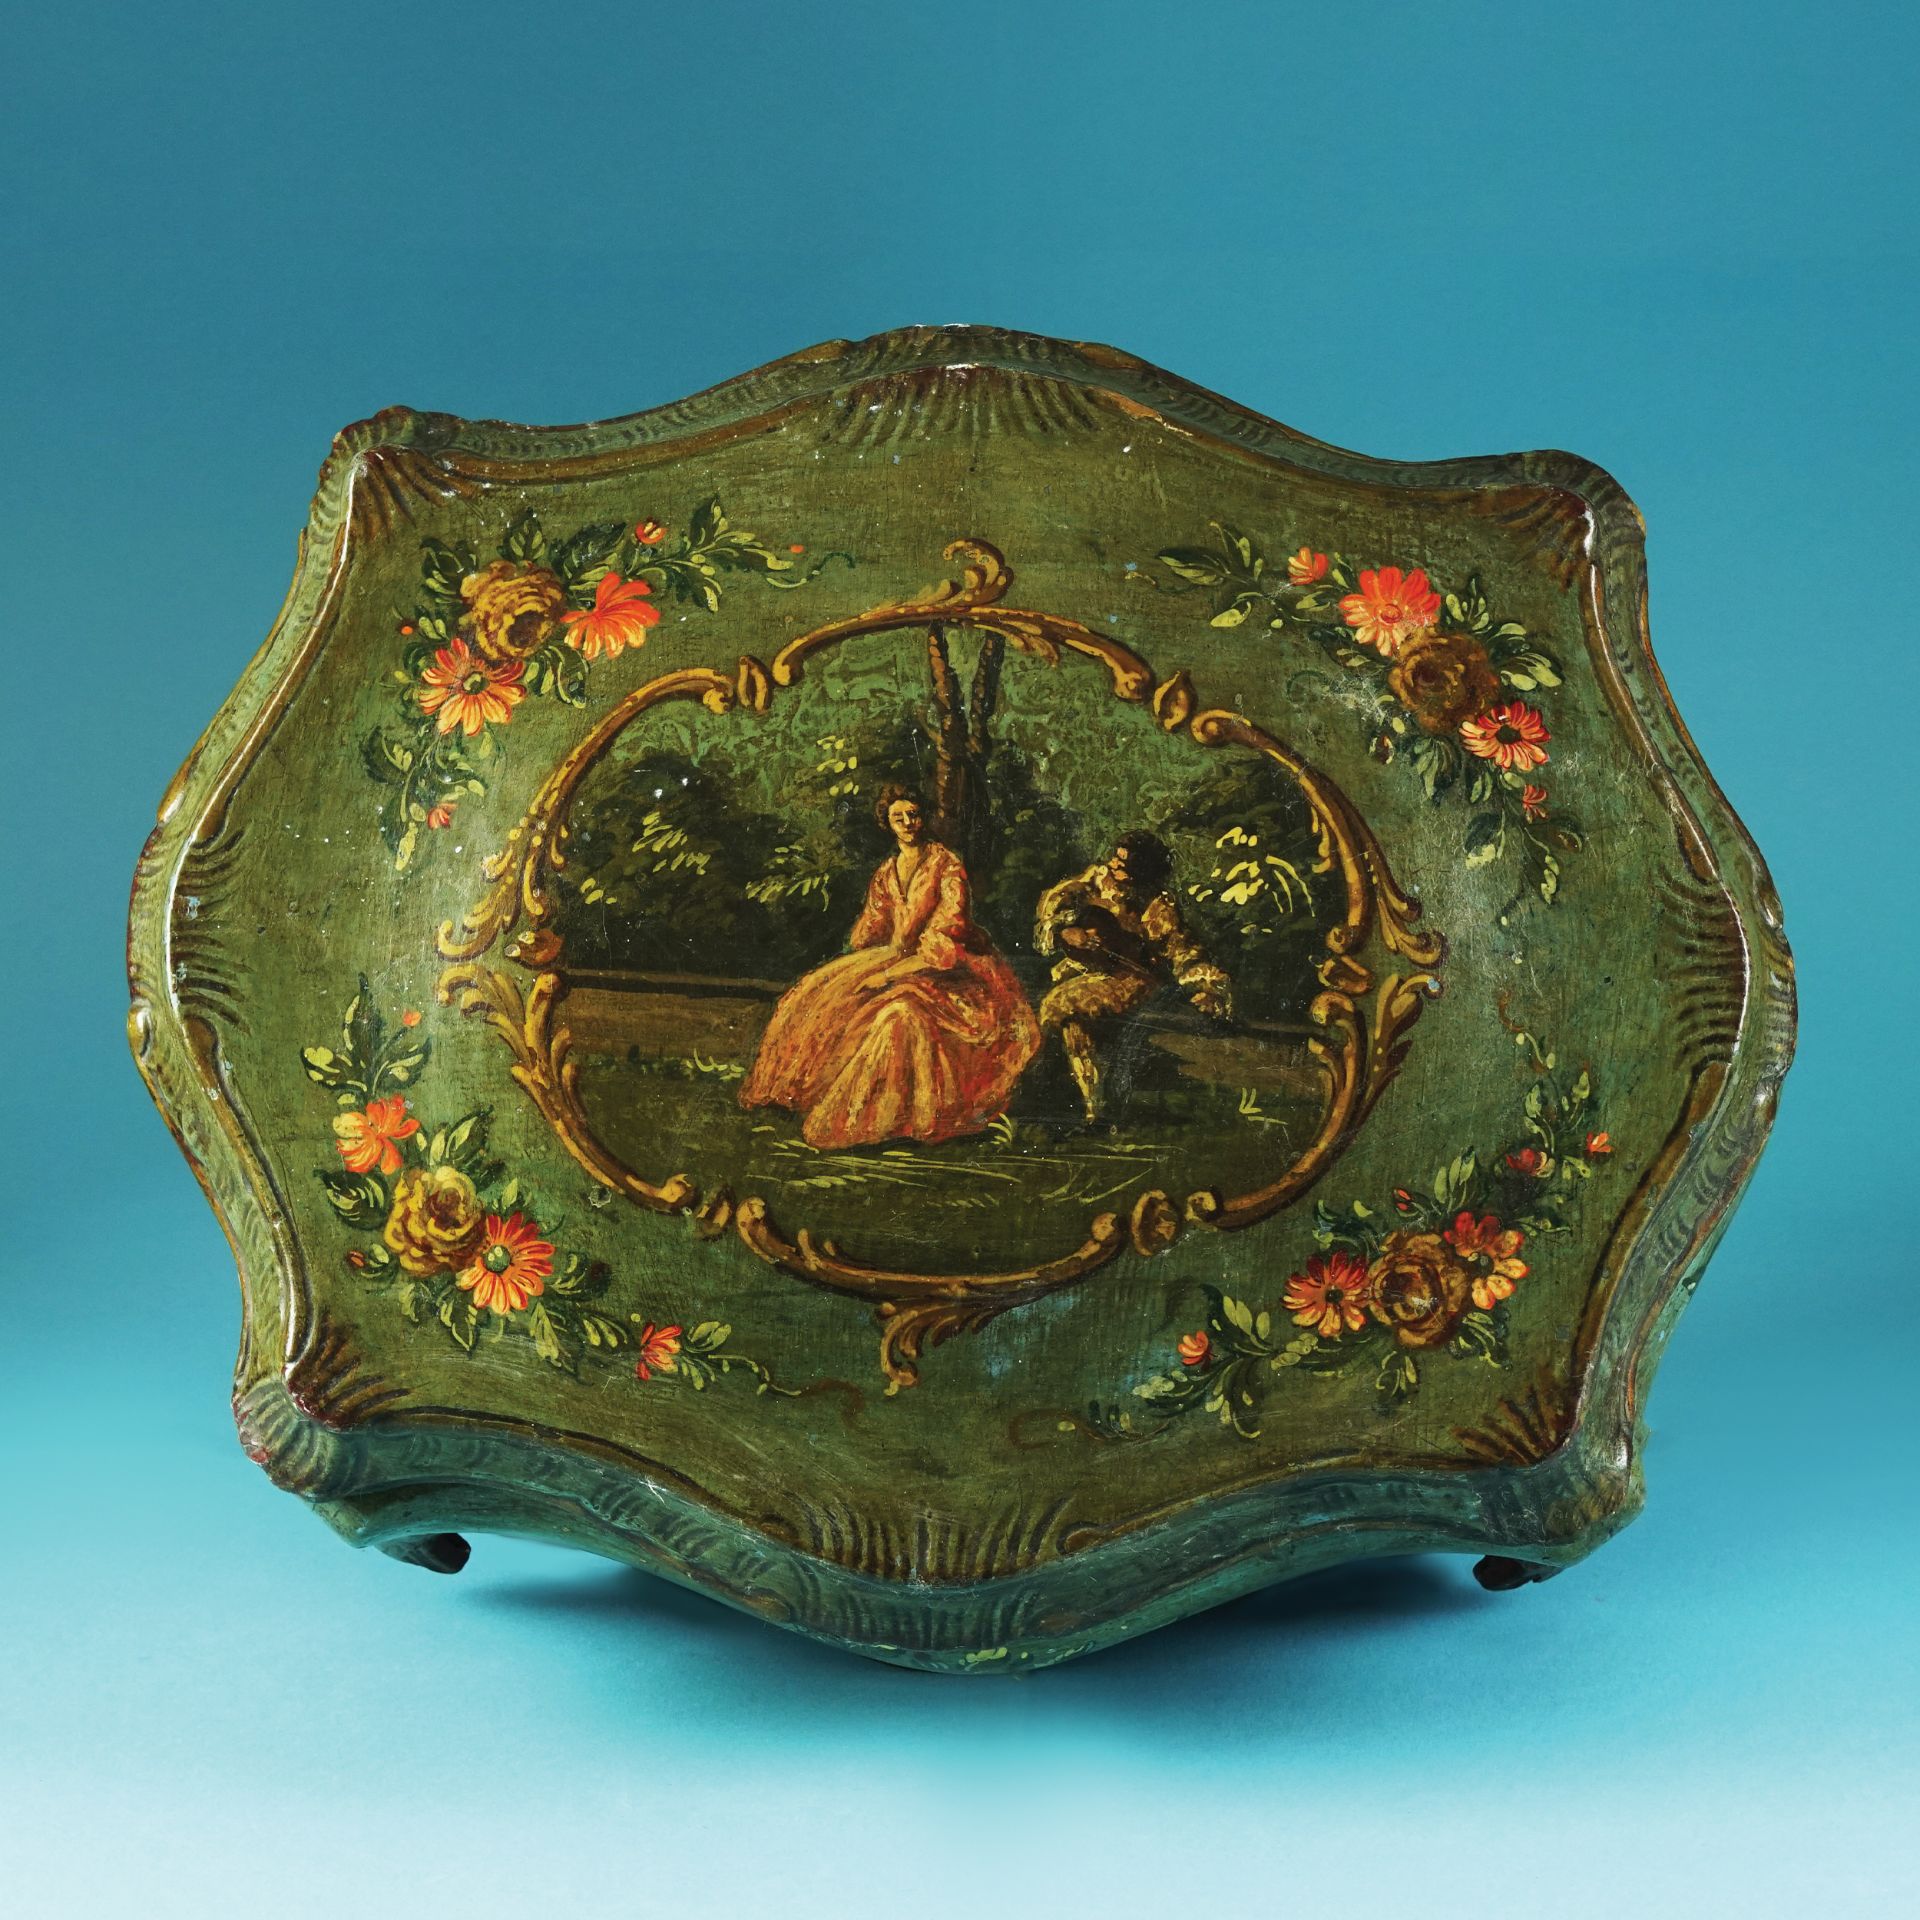 A Venetian green lacquered and painted wood casket, 18th century 16x41x33cm. - Bild 2 aus 3